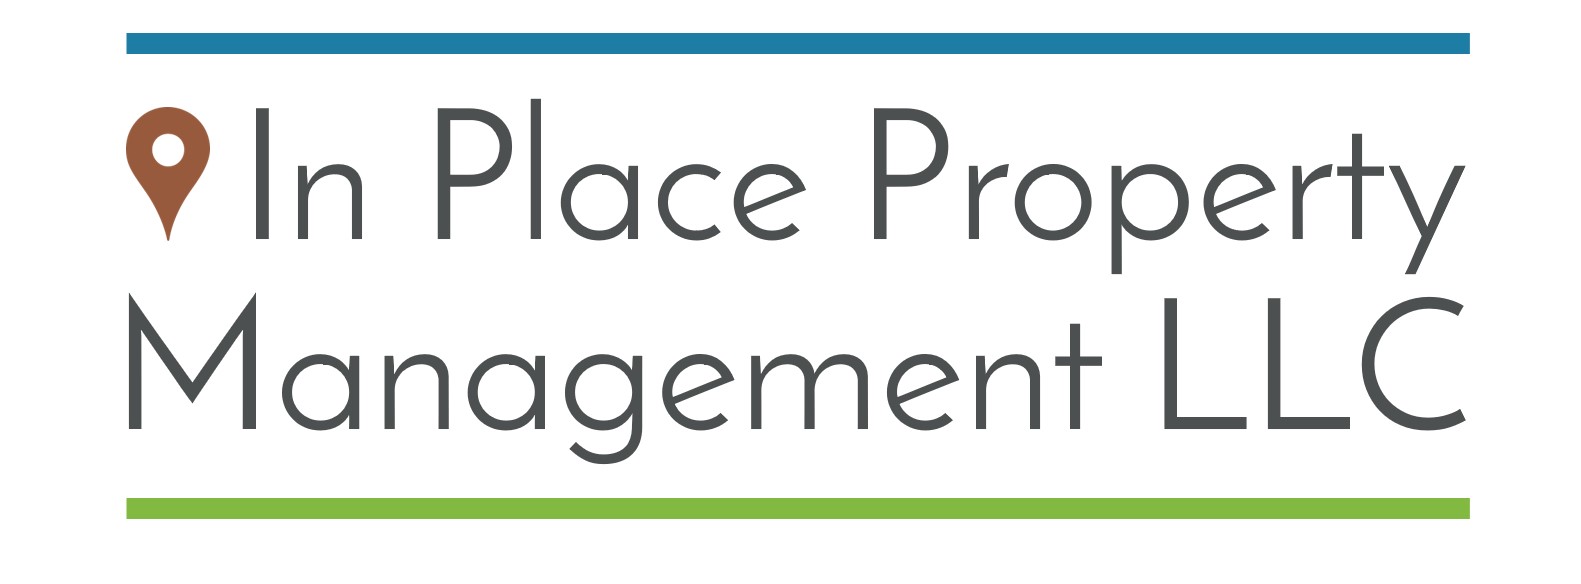 In Place Property Management LLC